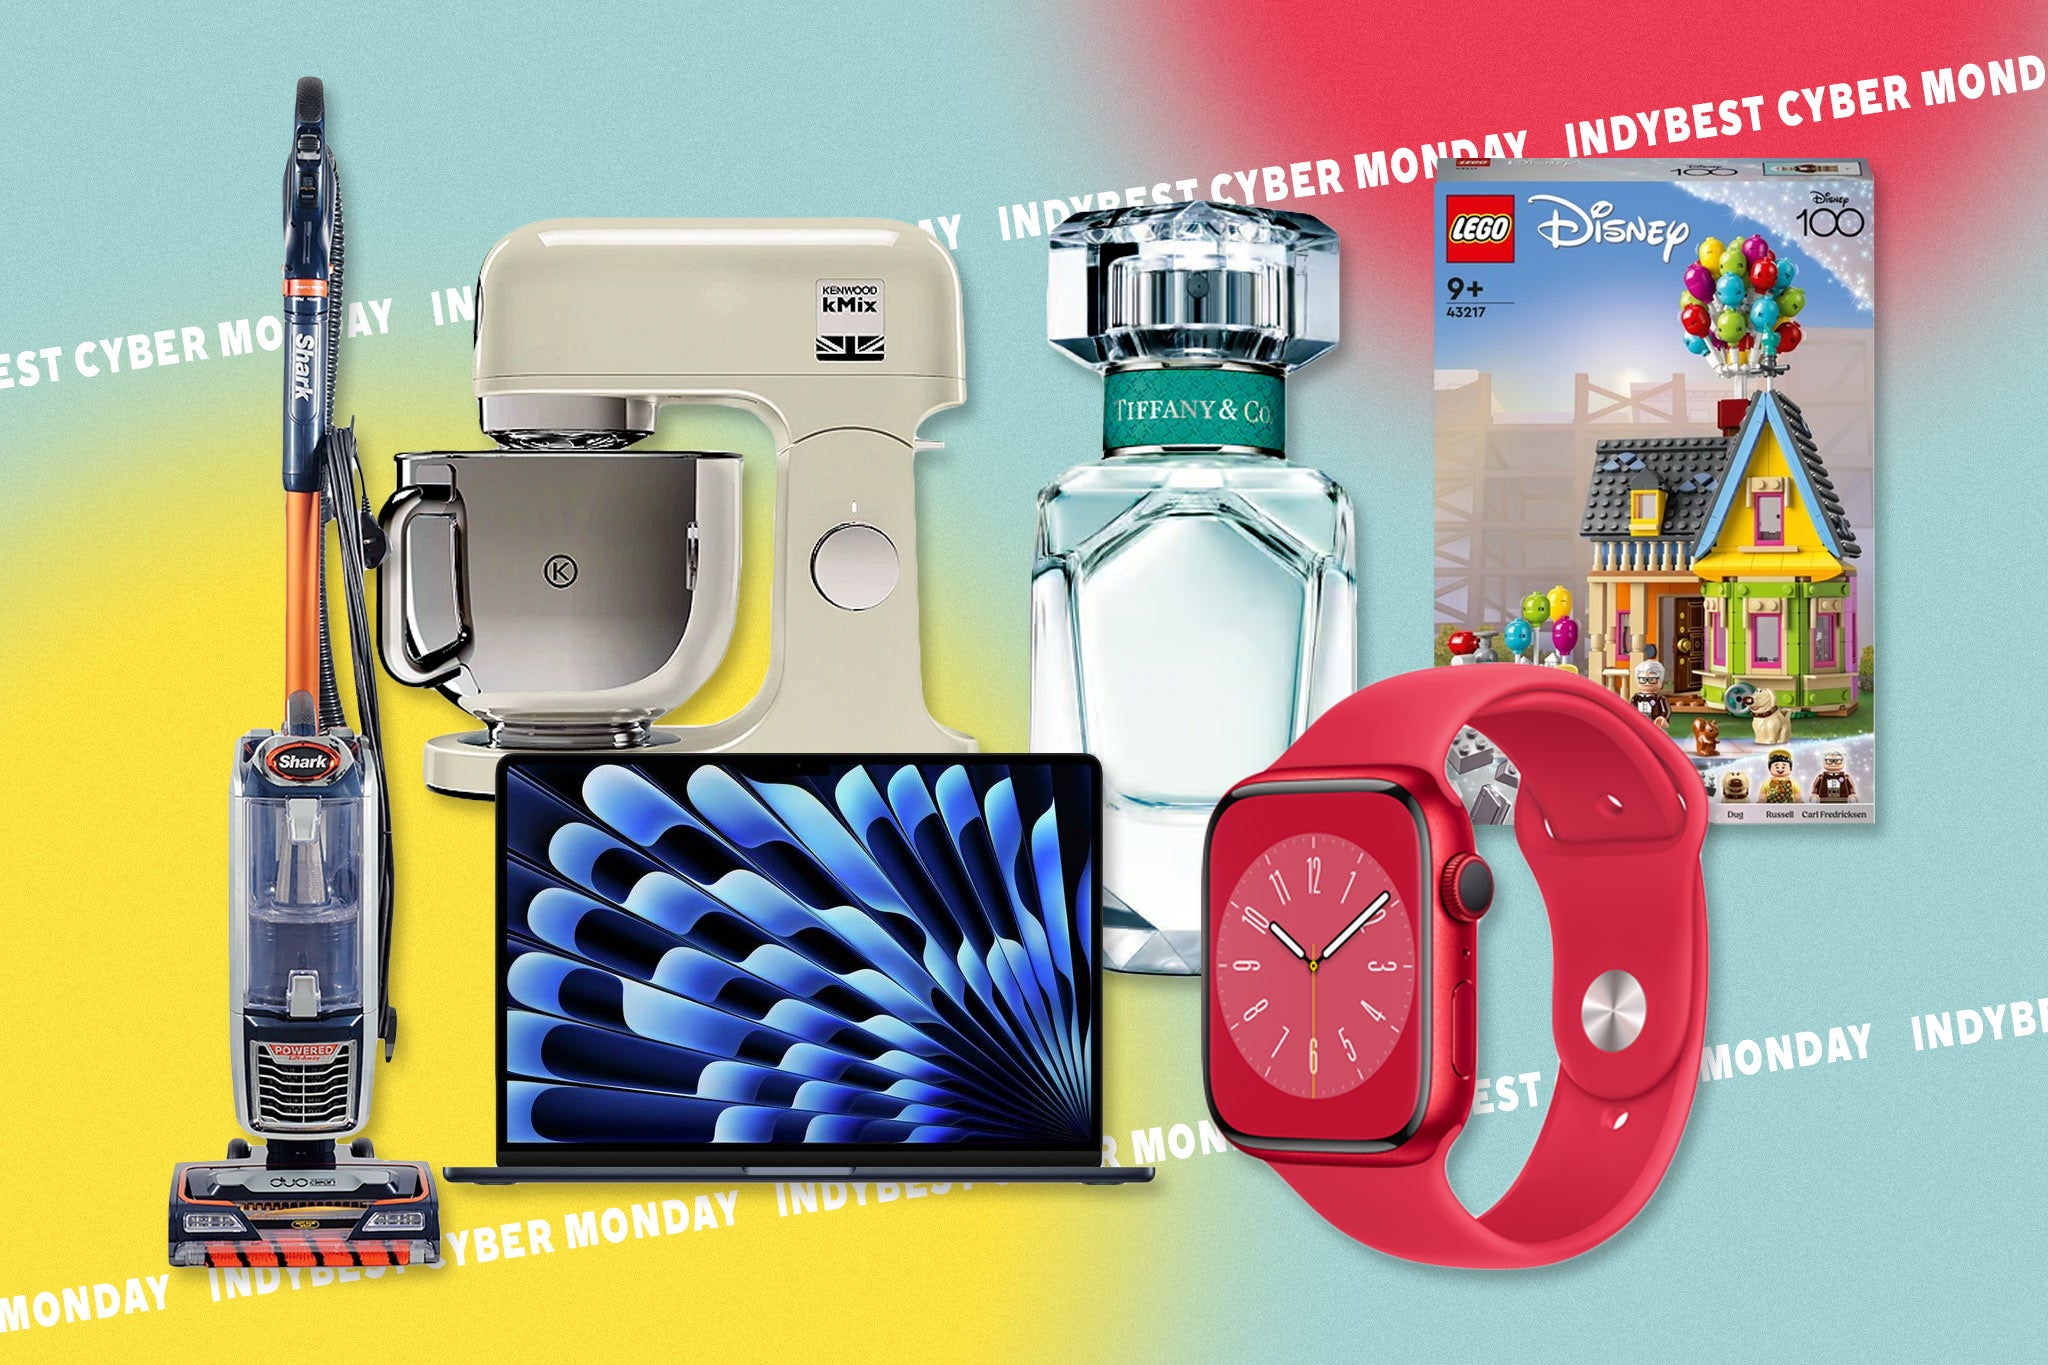 Save across tech, beauty, home appliances and more